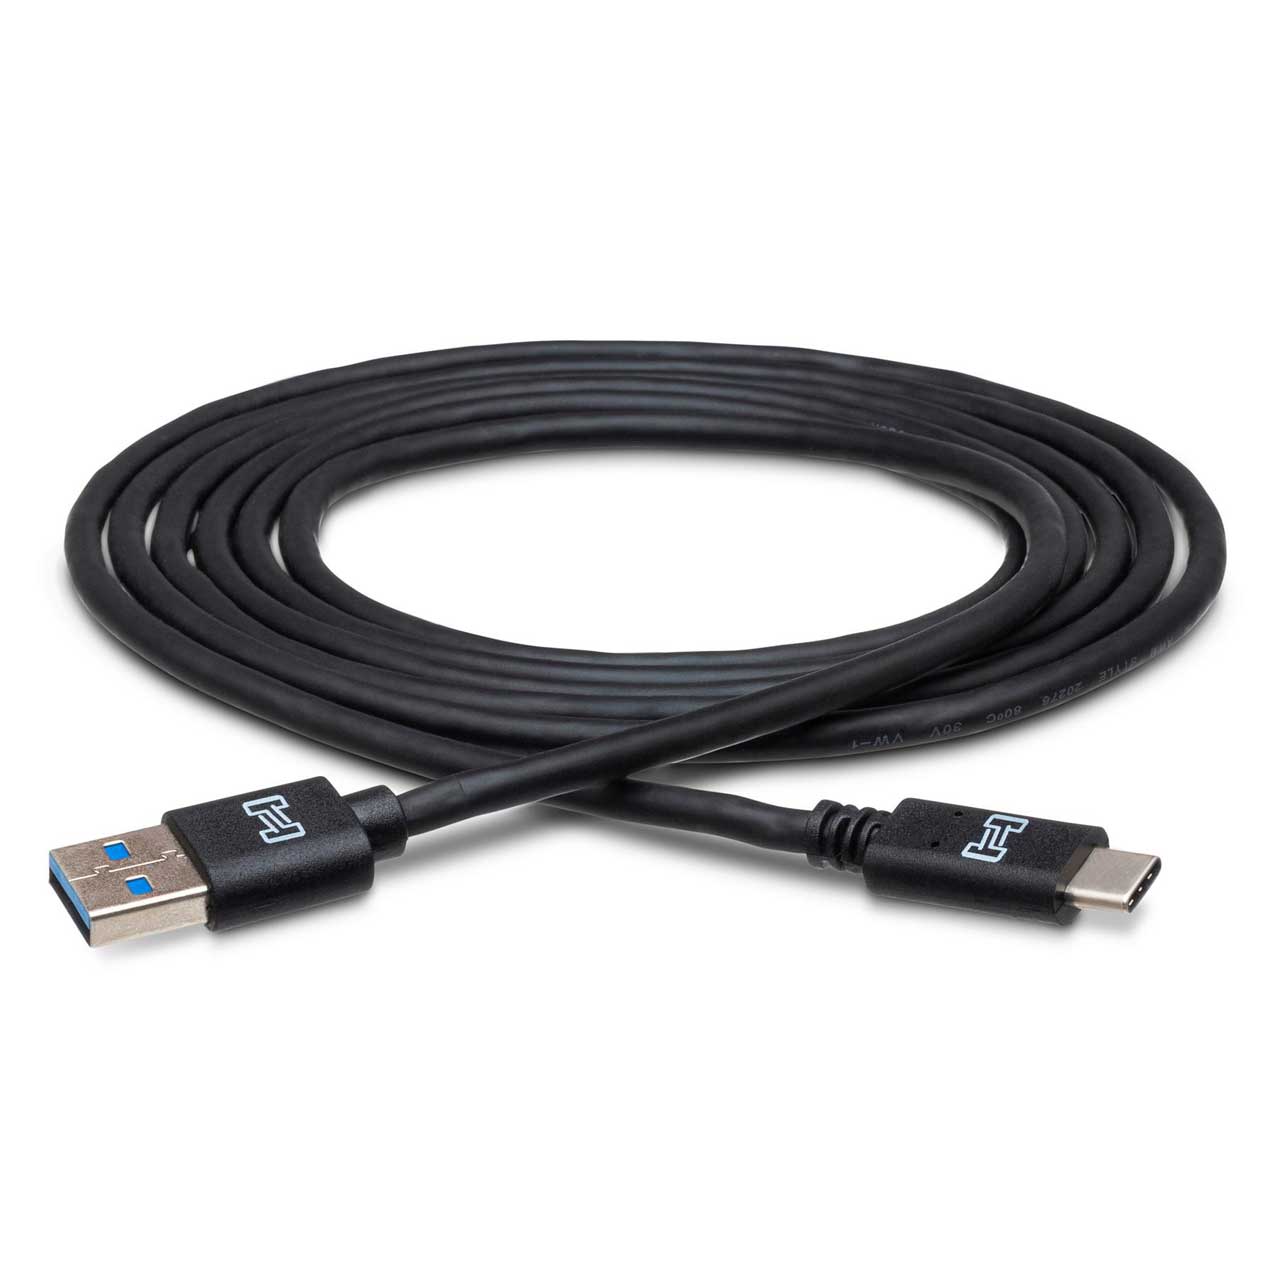 Hosa USB-306CA SuperSpeed USB 3.0 Cable Type A to Type C Foot